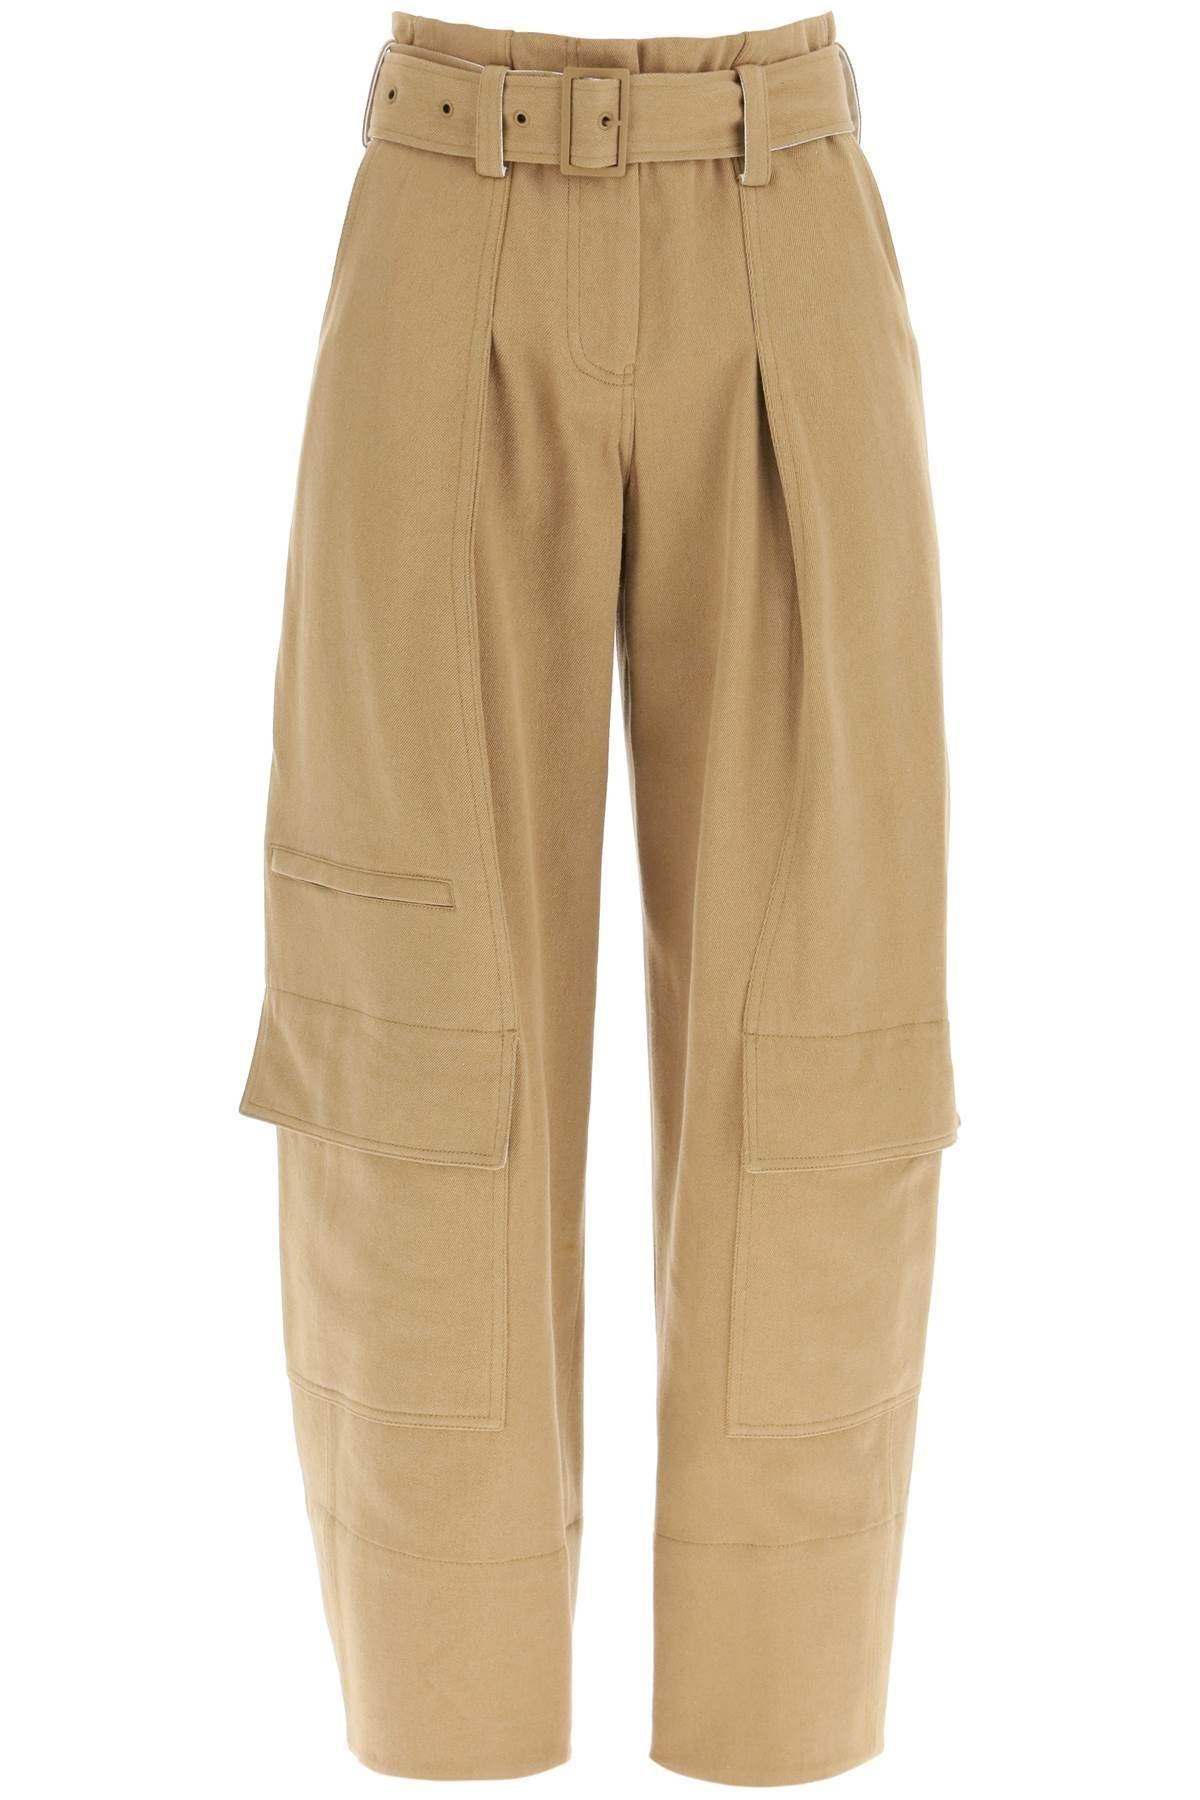 CARGO PANTS WITH MATCHING BELT - 1